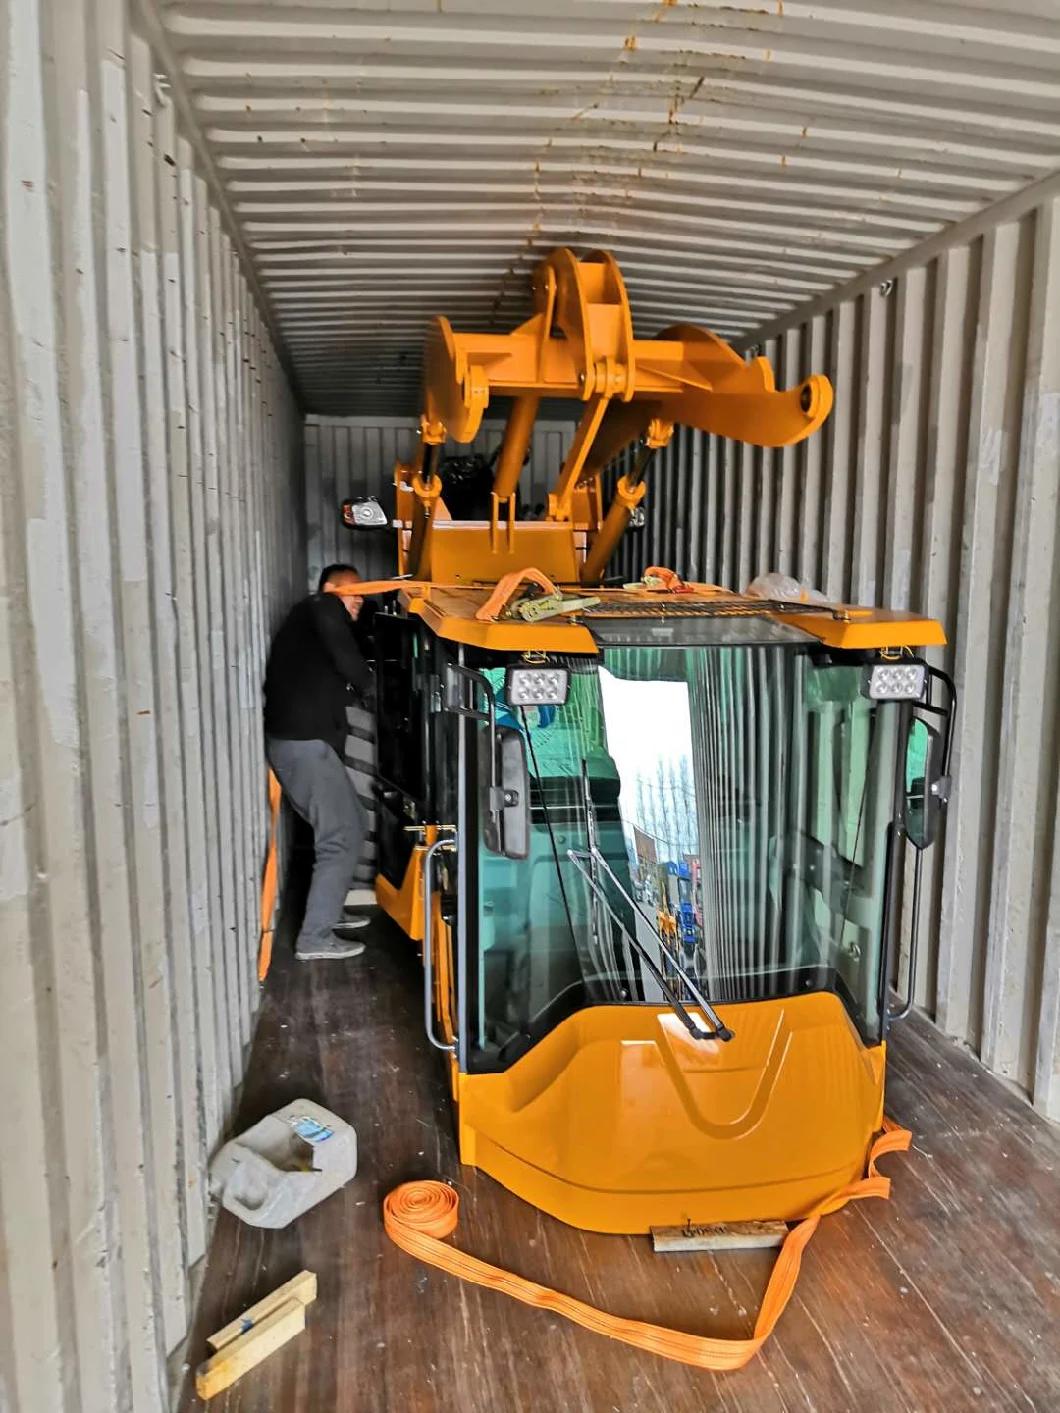 Wheel Loaders with Manual Operation and Hydraulic Transmission Type